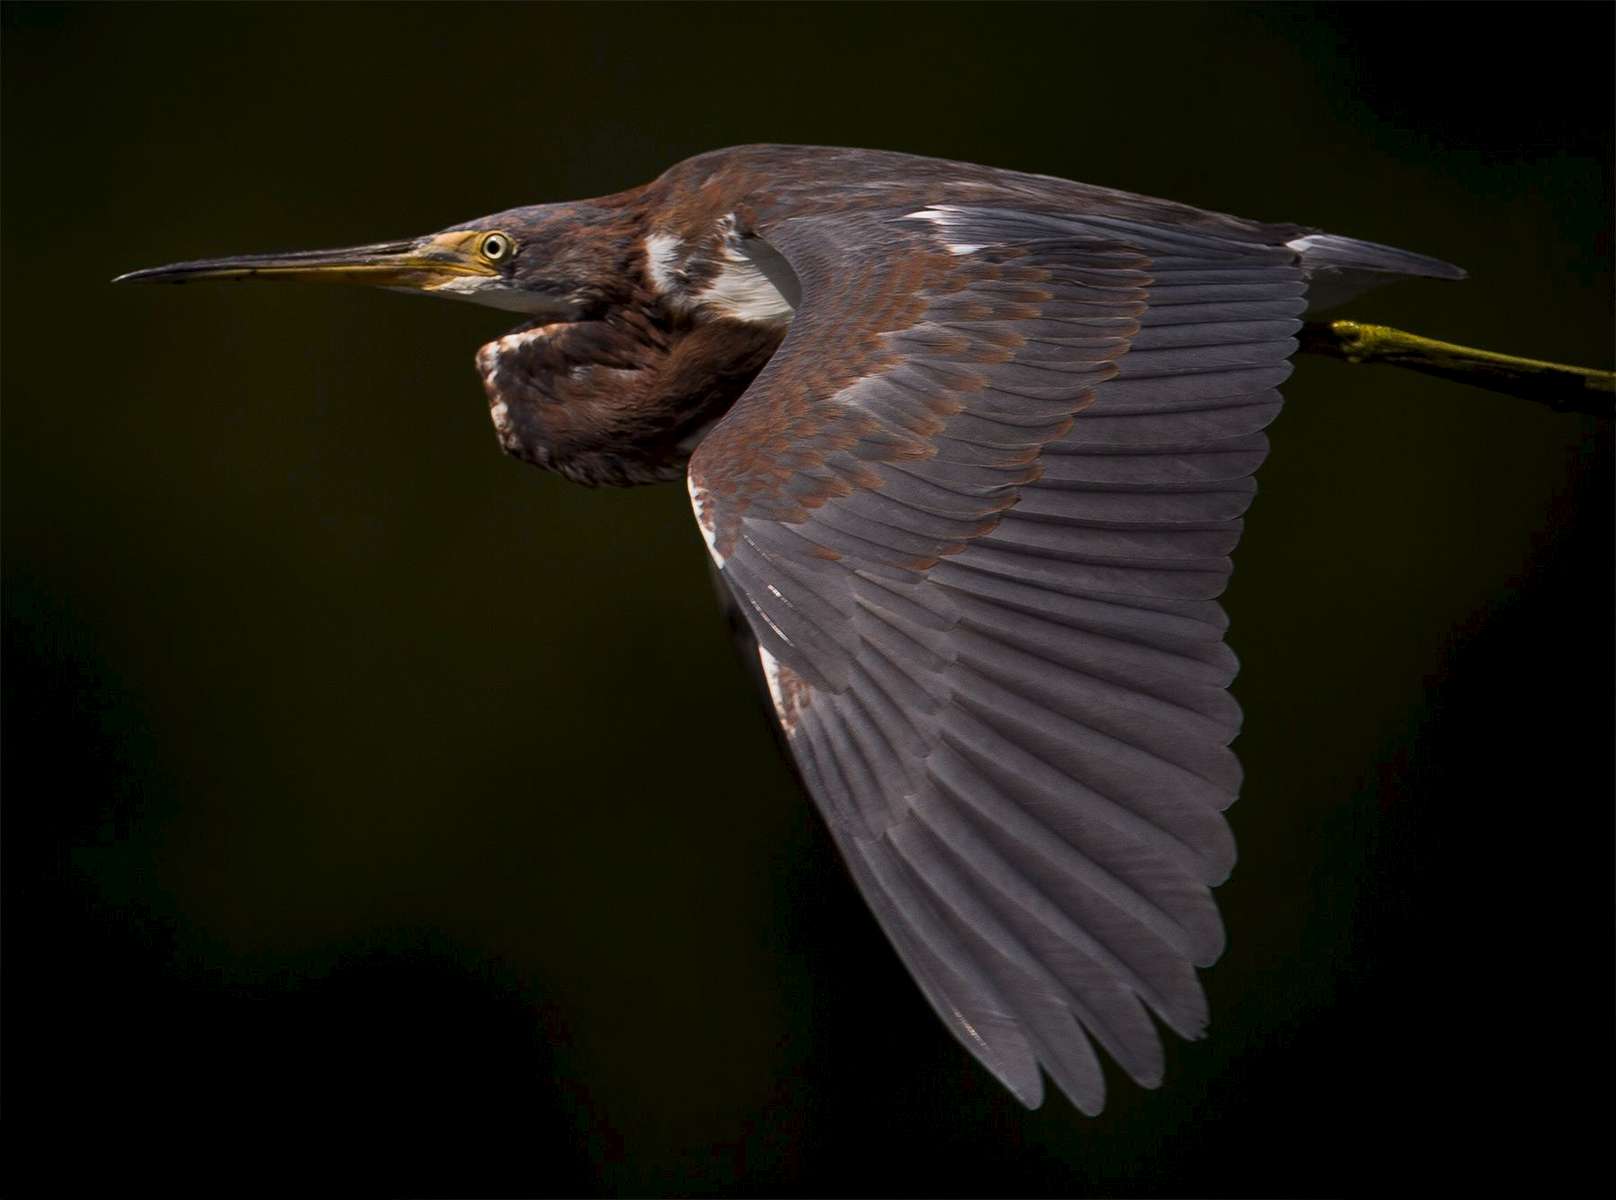 A Tricolored Heron in flight at Huntinton Beach State Park.